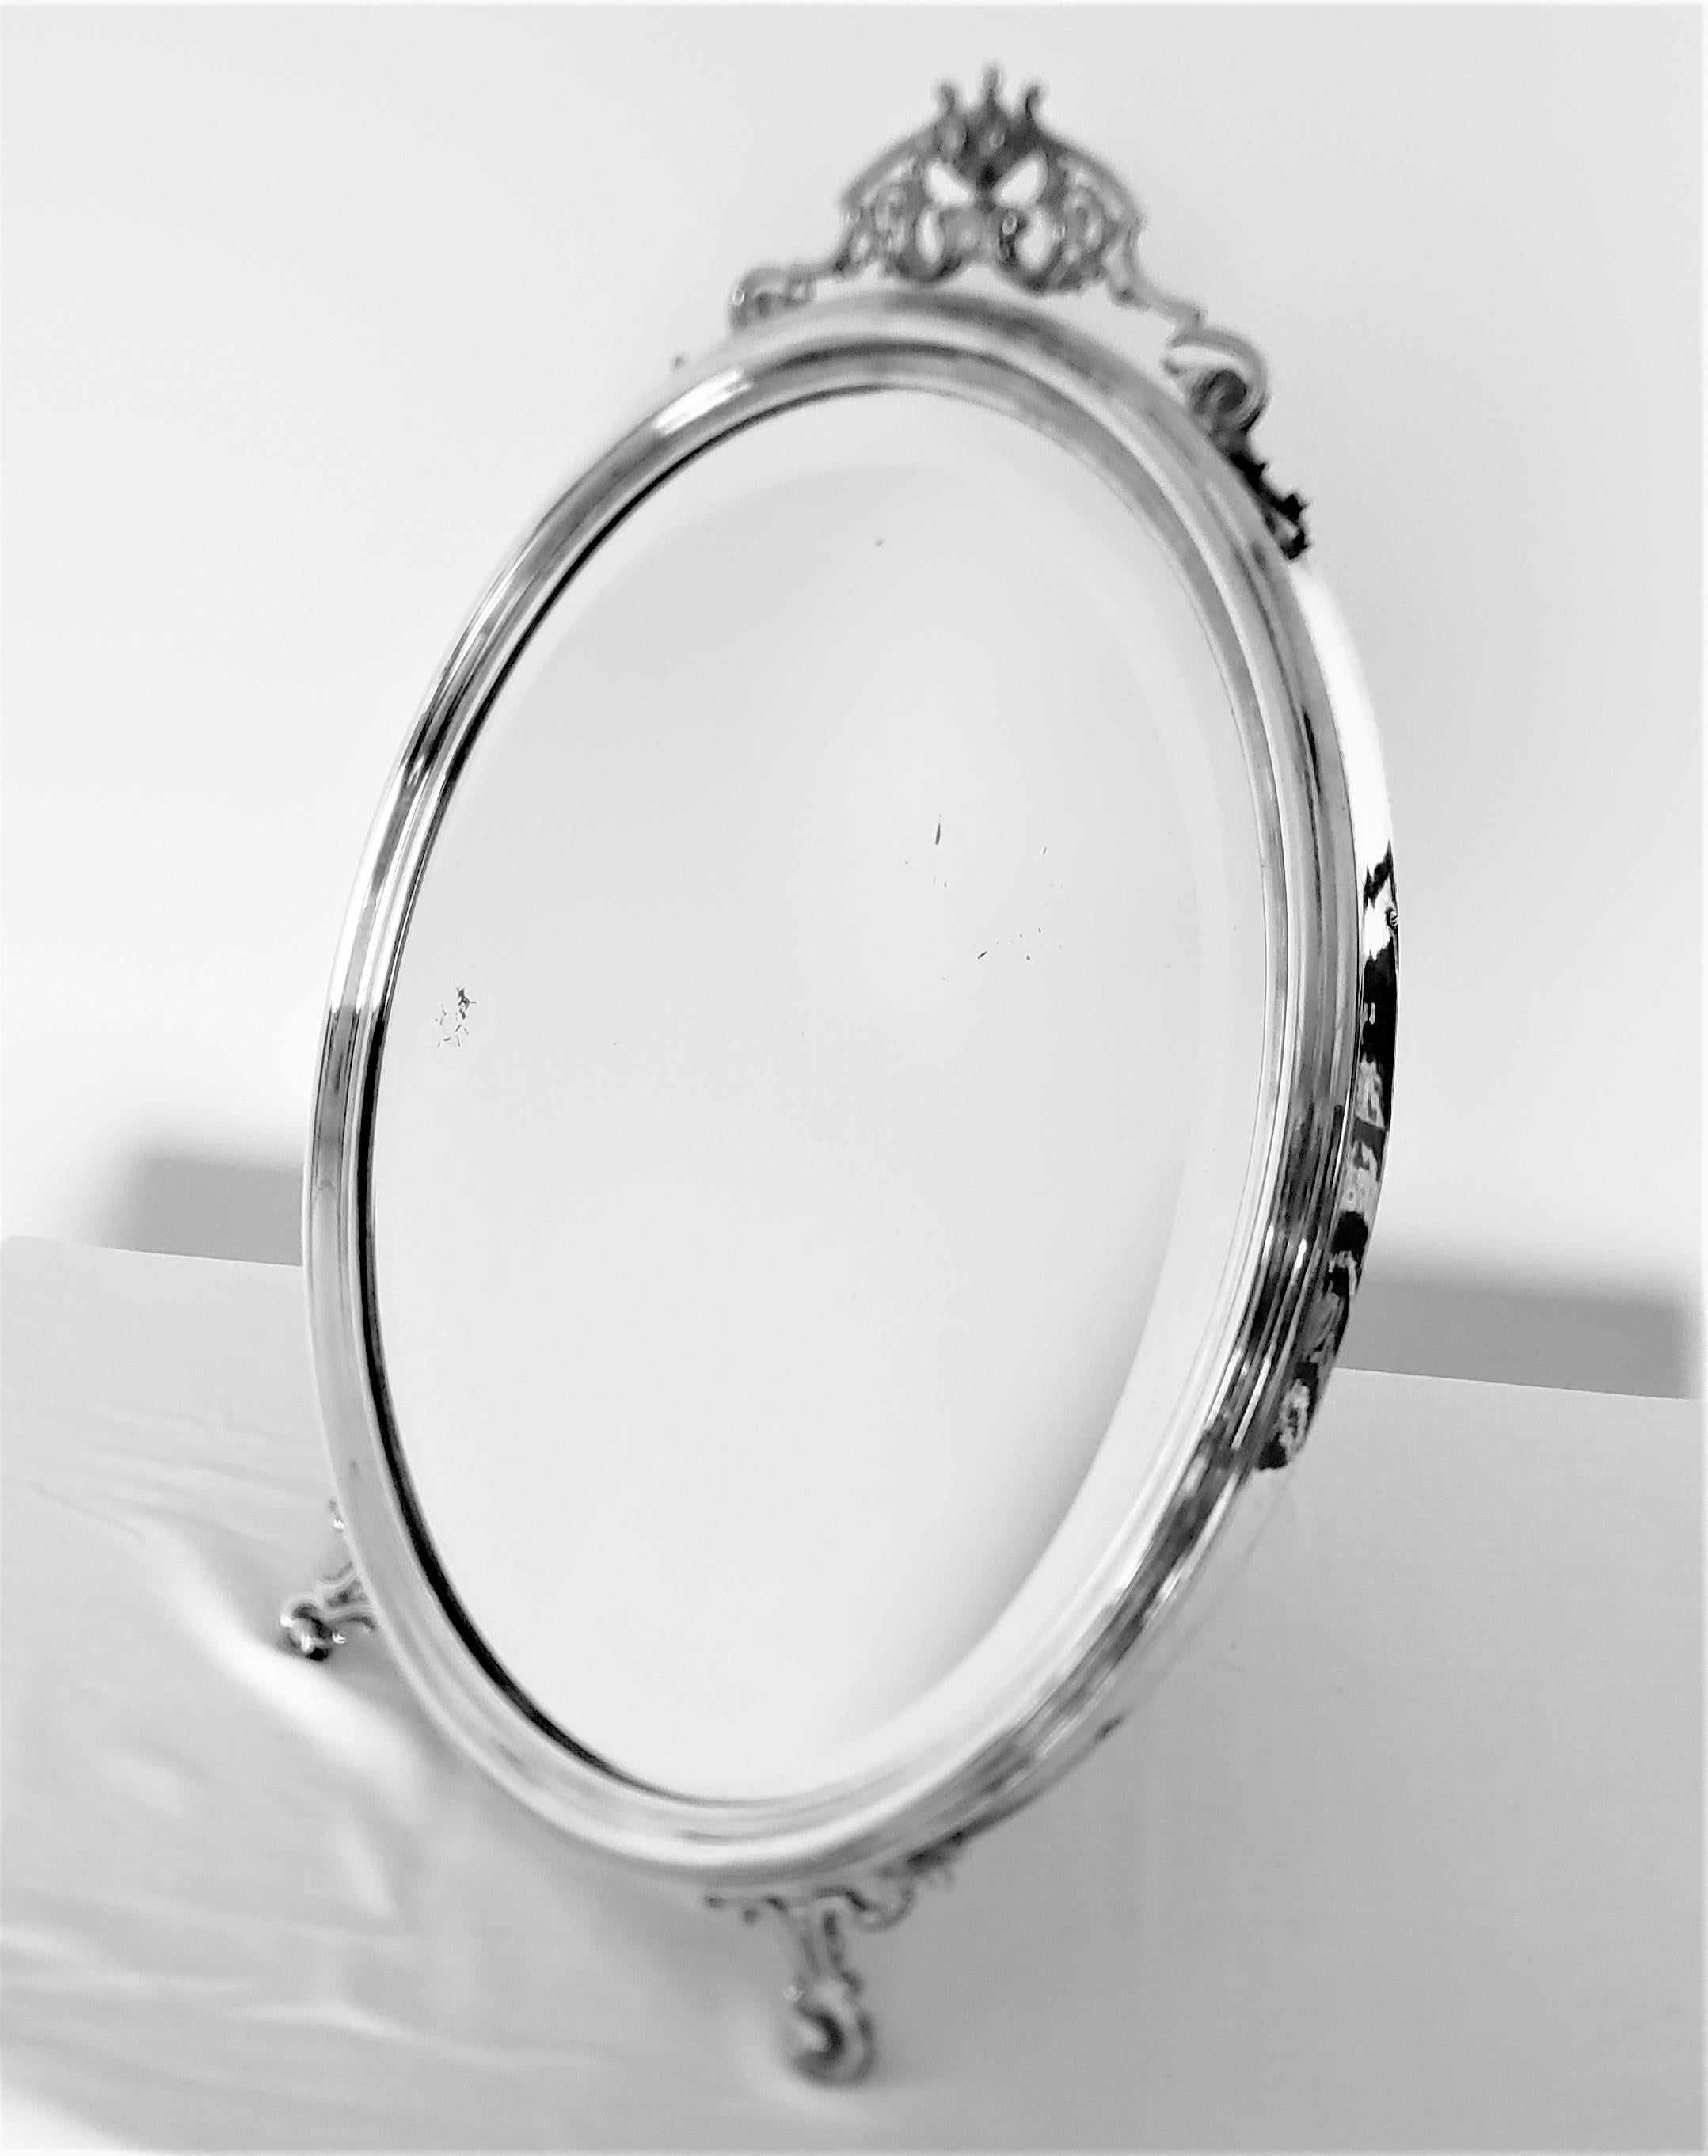 This antique silver plated oval mirror was made by the renowned Art Krupp Berndorf of England and dating to approximately 1900 and done in a period Edwardian style. This vanity or table mirror is very well constructed using a solid pine inner frame,